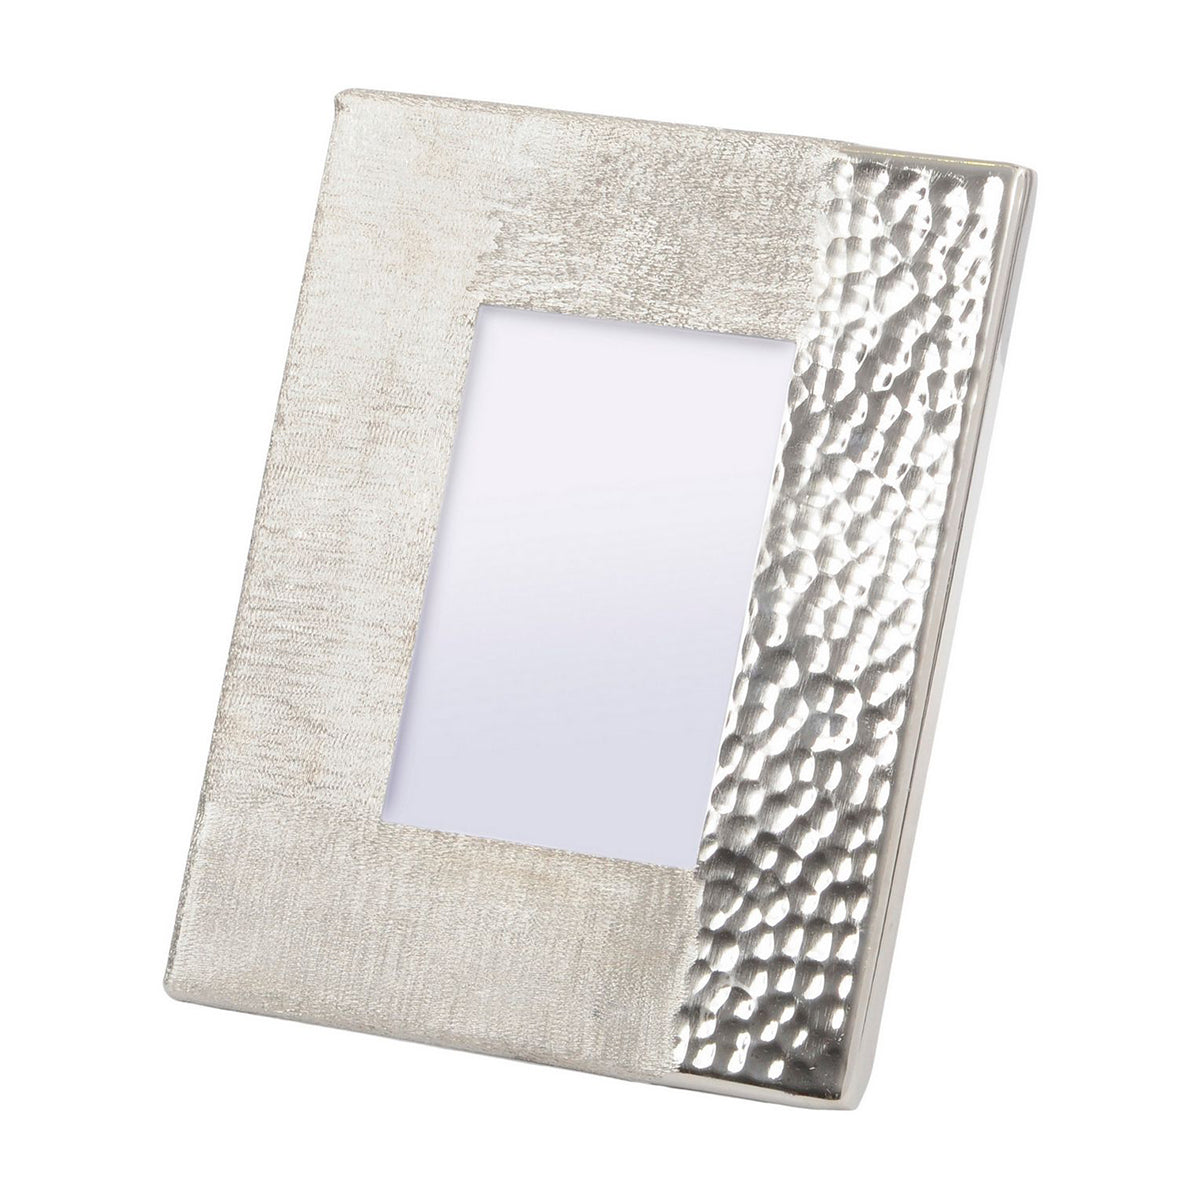 Fuse Hammered and Brushed 4X6 Inch Photo Frame in Silver Finish